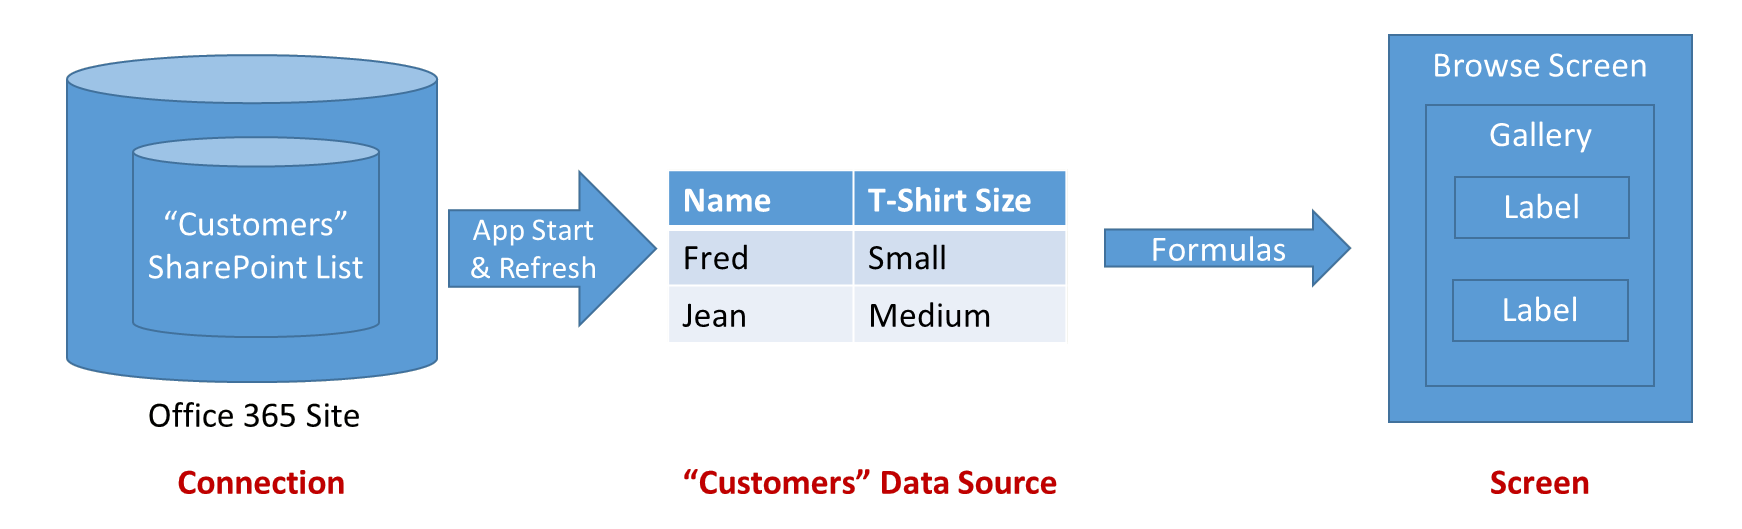 Flow of information when an app reads the information in a data source.